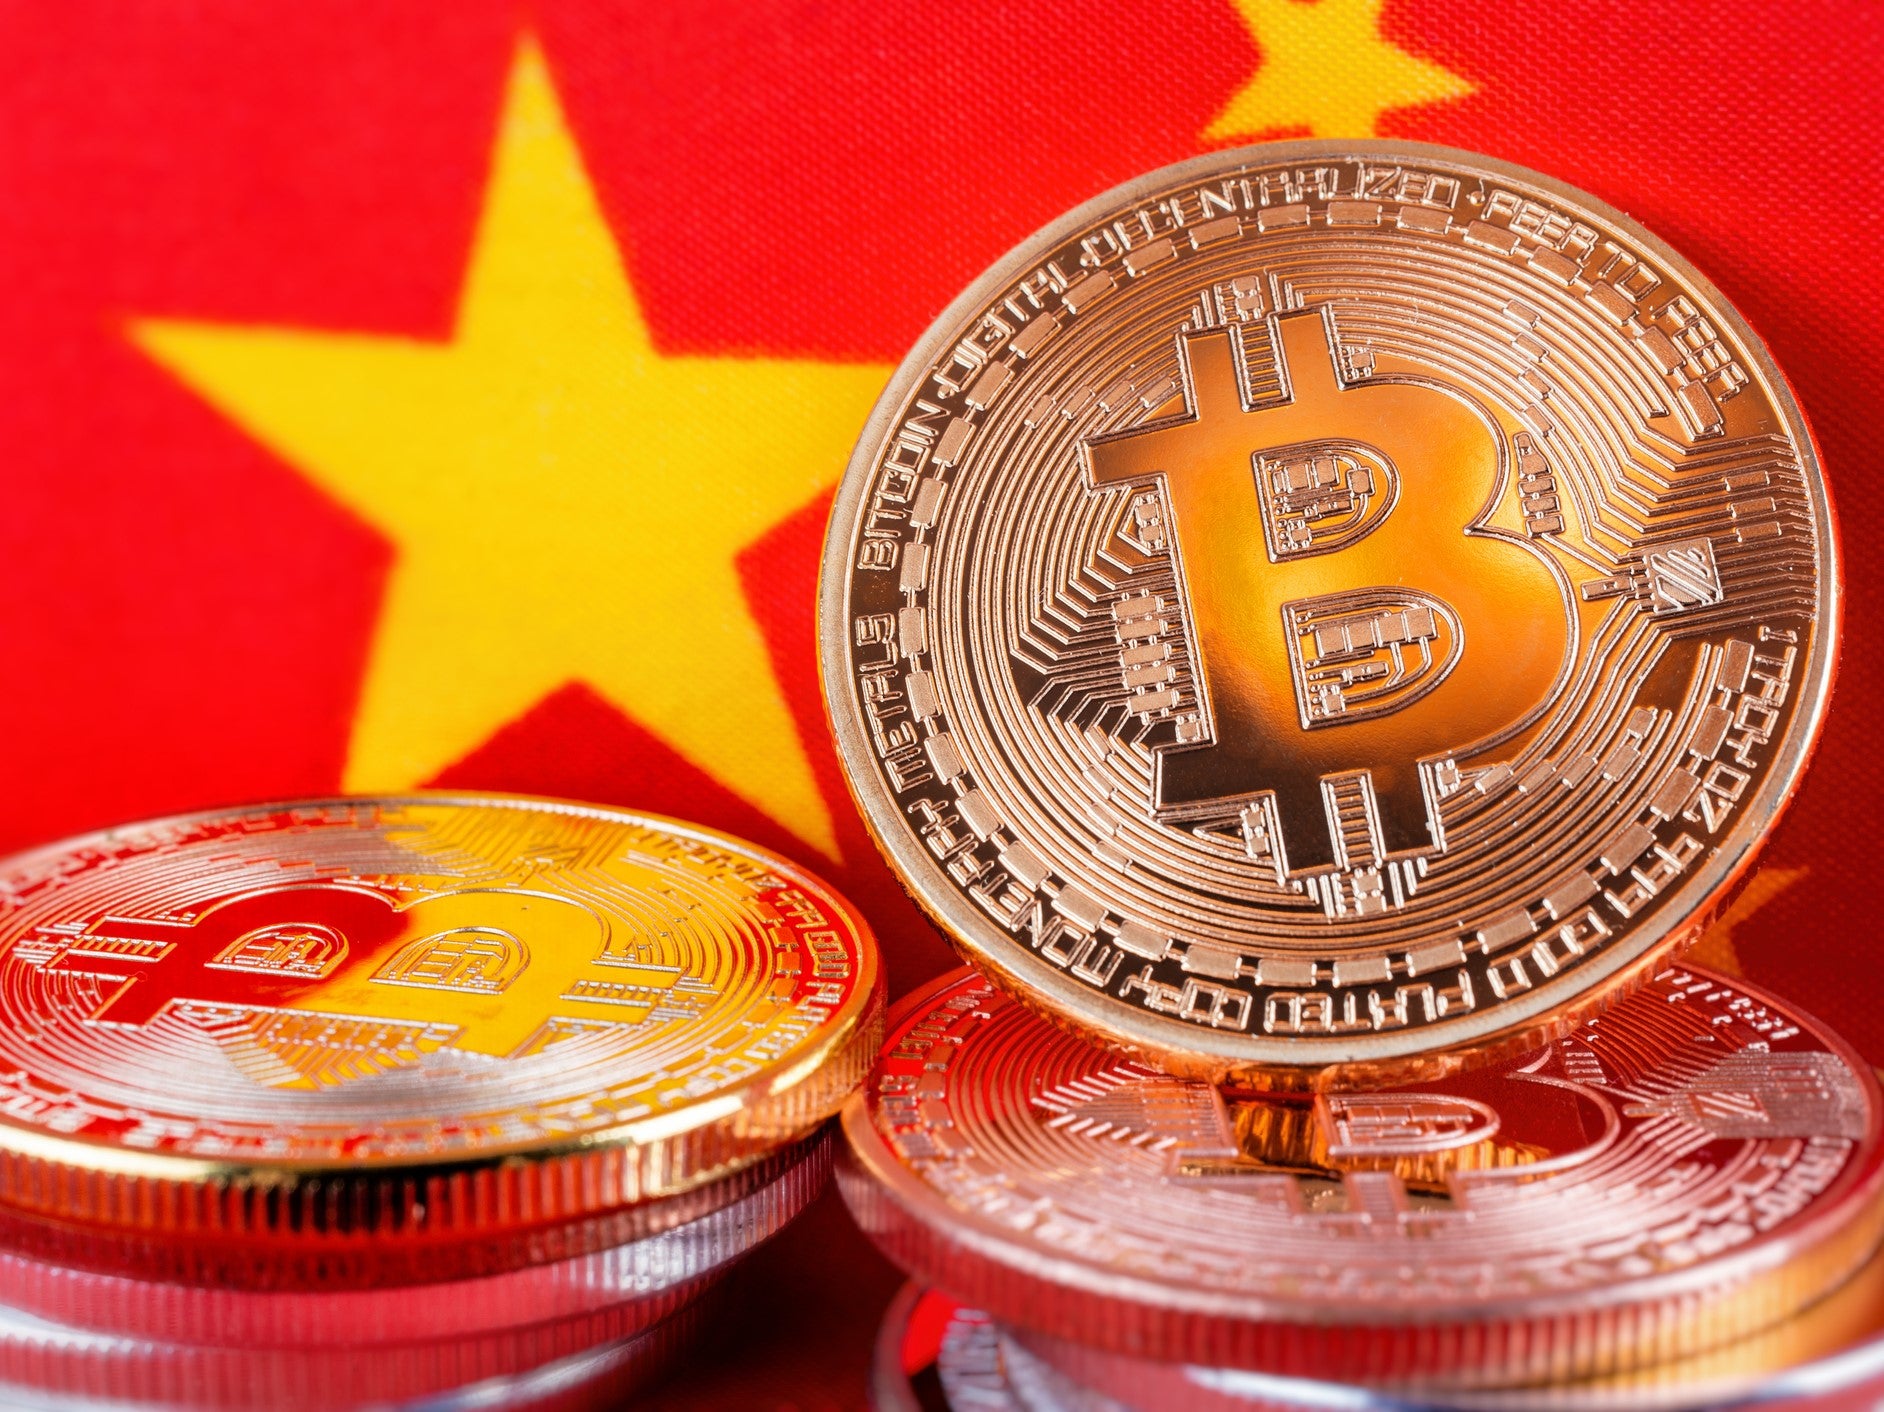 The United States has overtaken China to account for the largest share of the world’s bitcoin mining